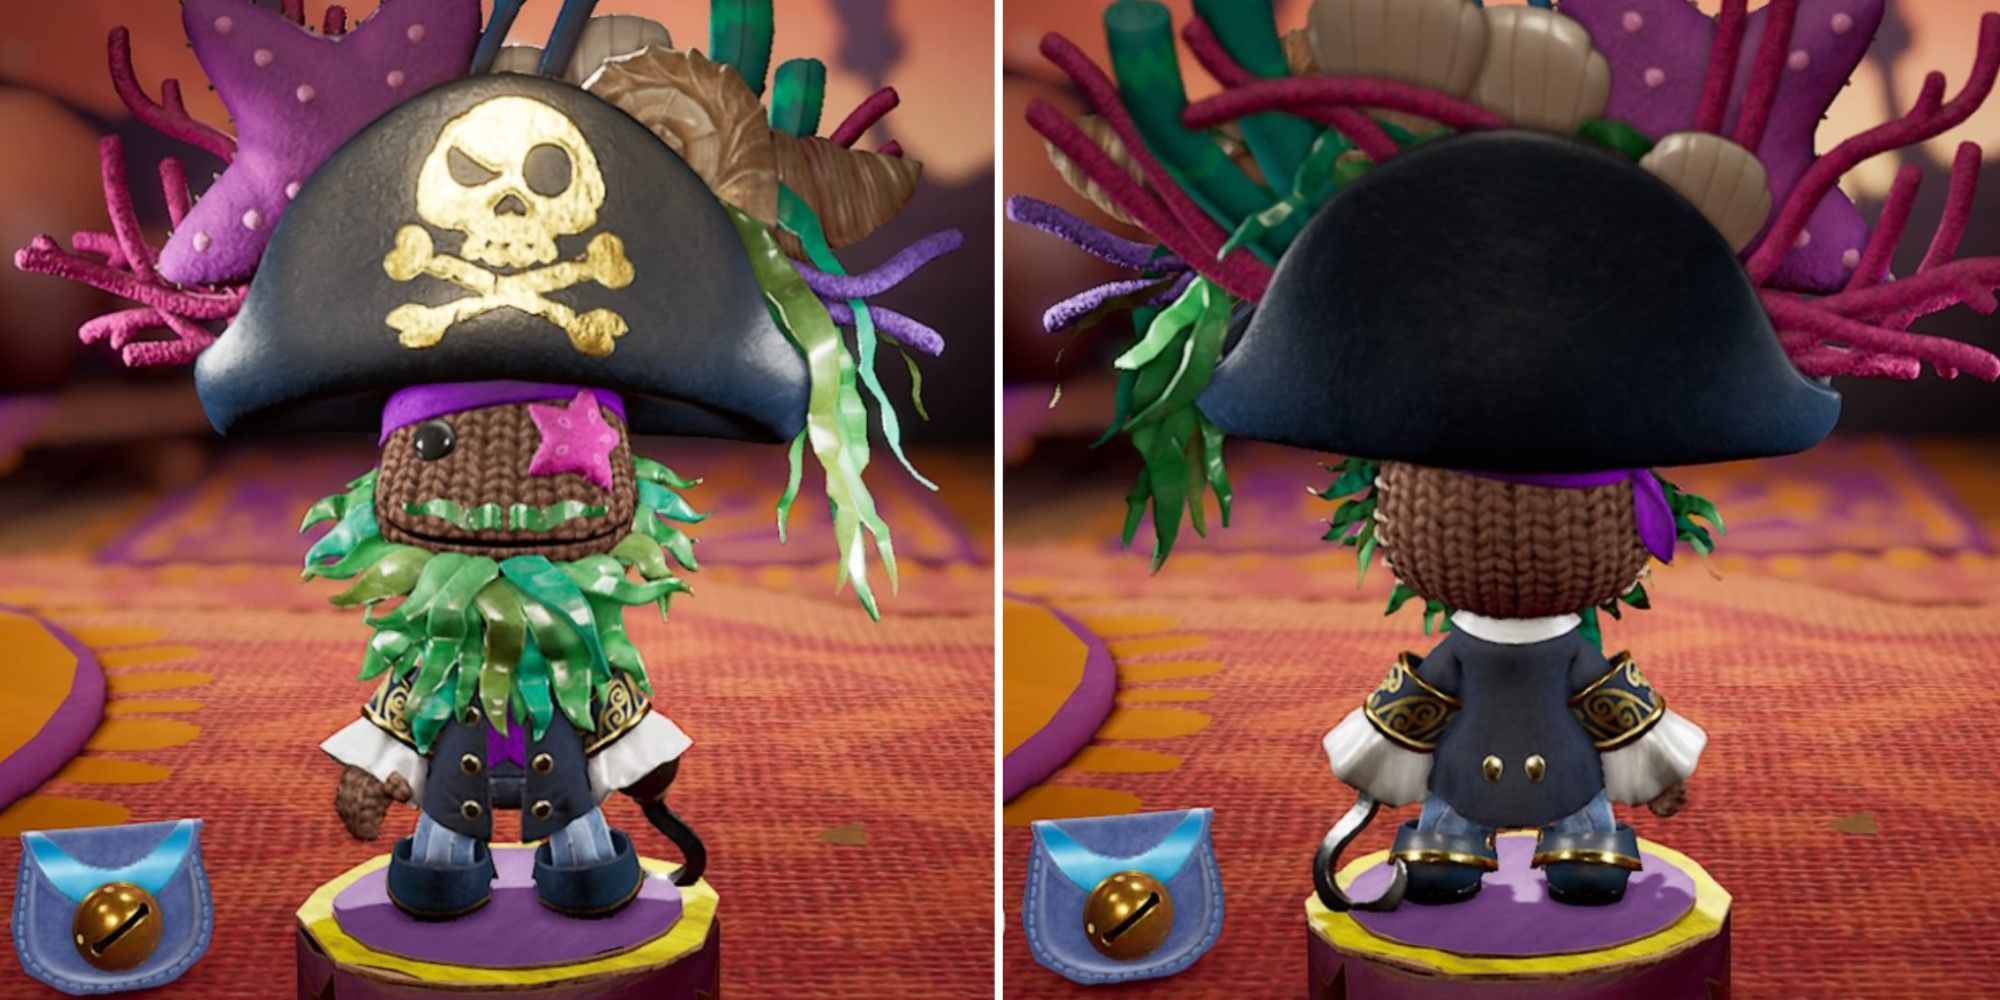 Two screenshots of the Sunken Pirate Costume from Sackboy: A Big Adventure.